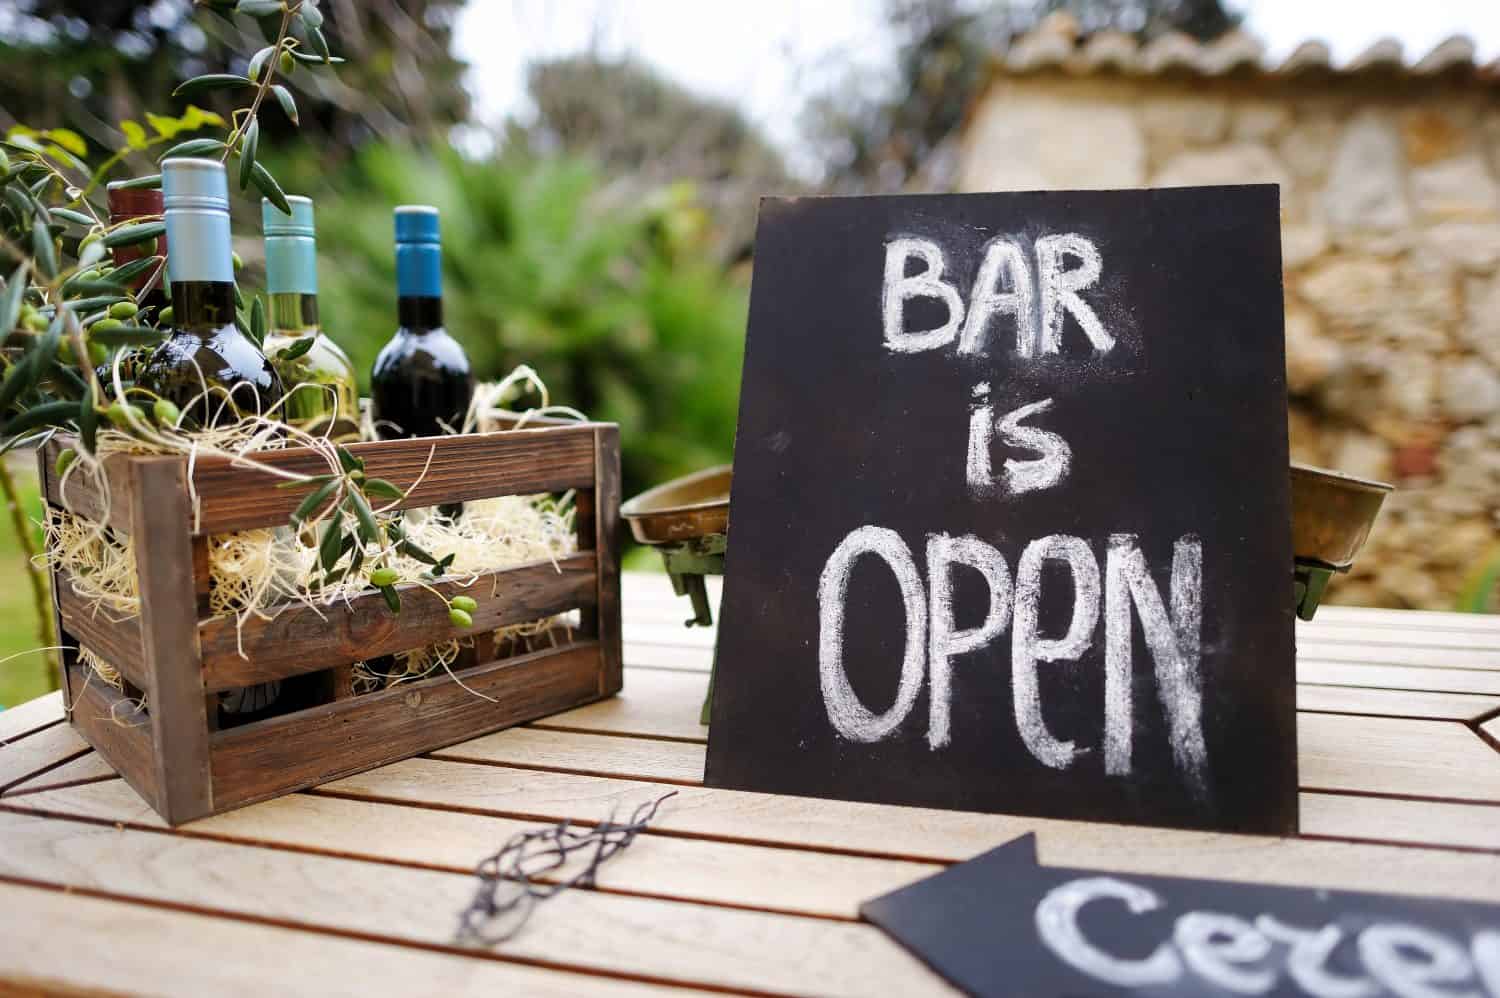 Bar is open sign and vintage wooden crate full of wine bottles decorated with olive branches on a table